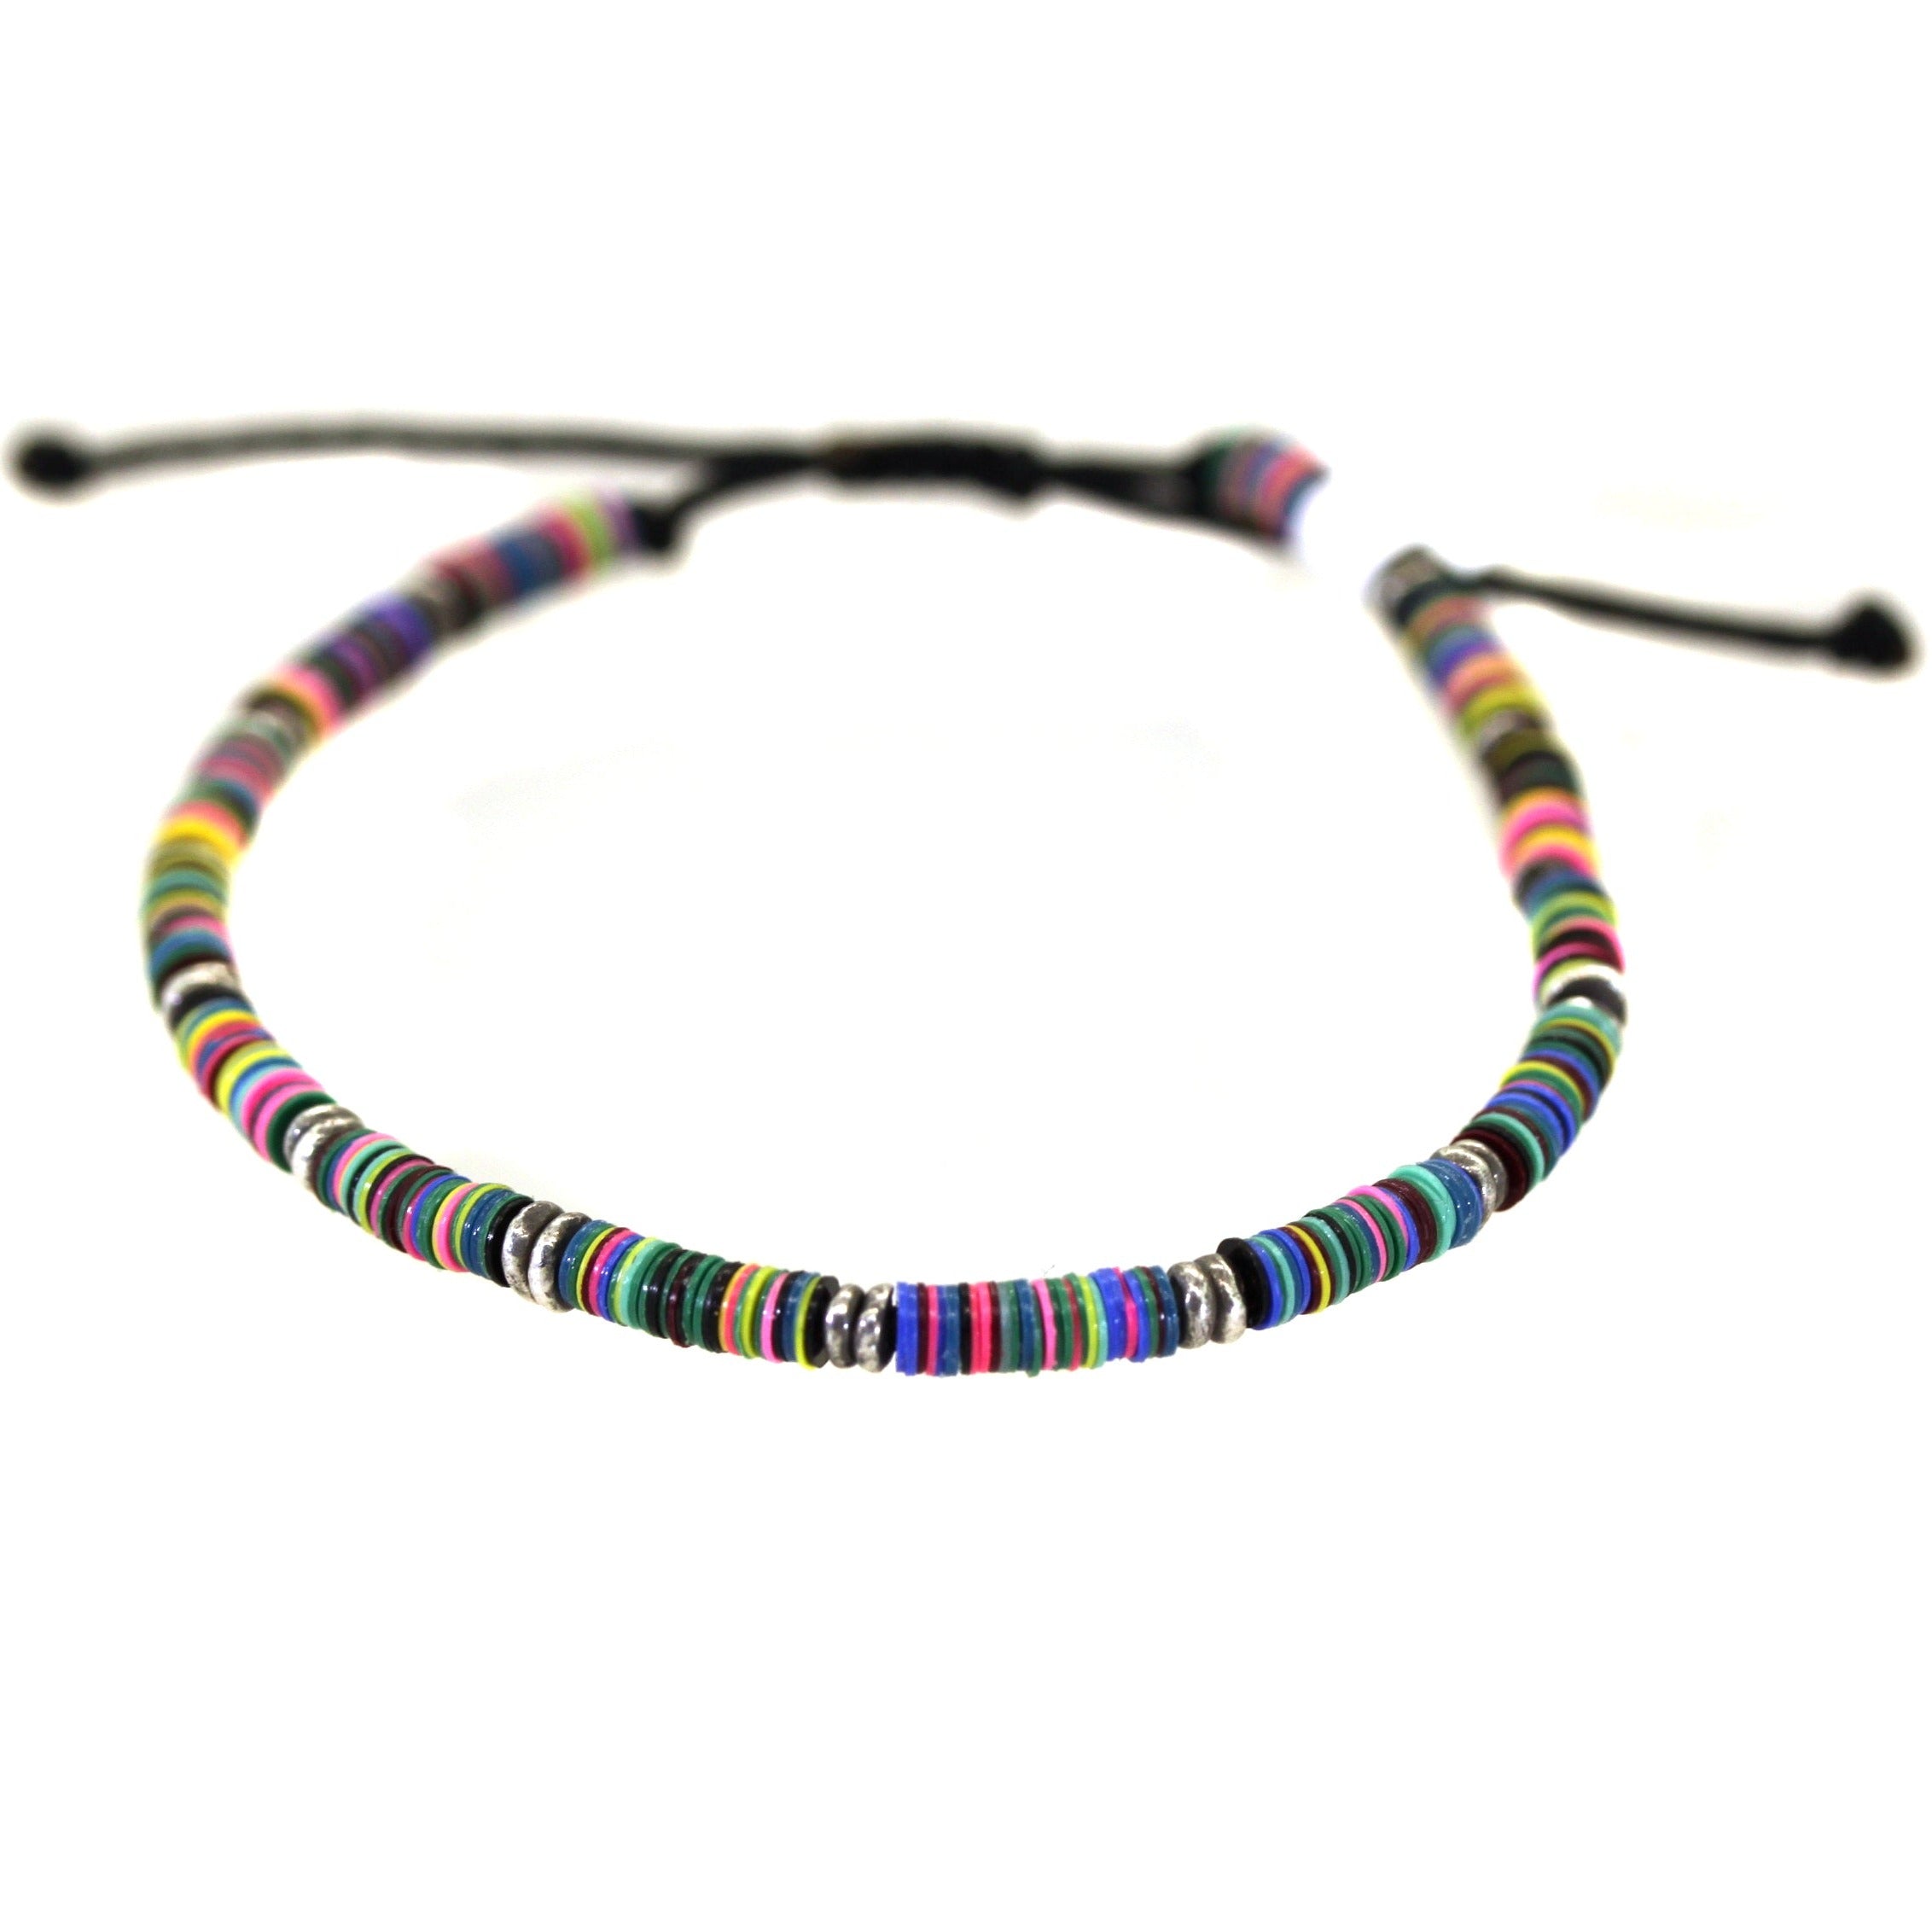 Multi Colored Beads & Silver Beads on Black Macrame